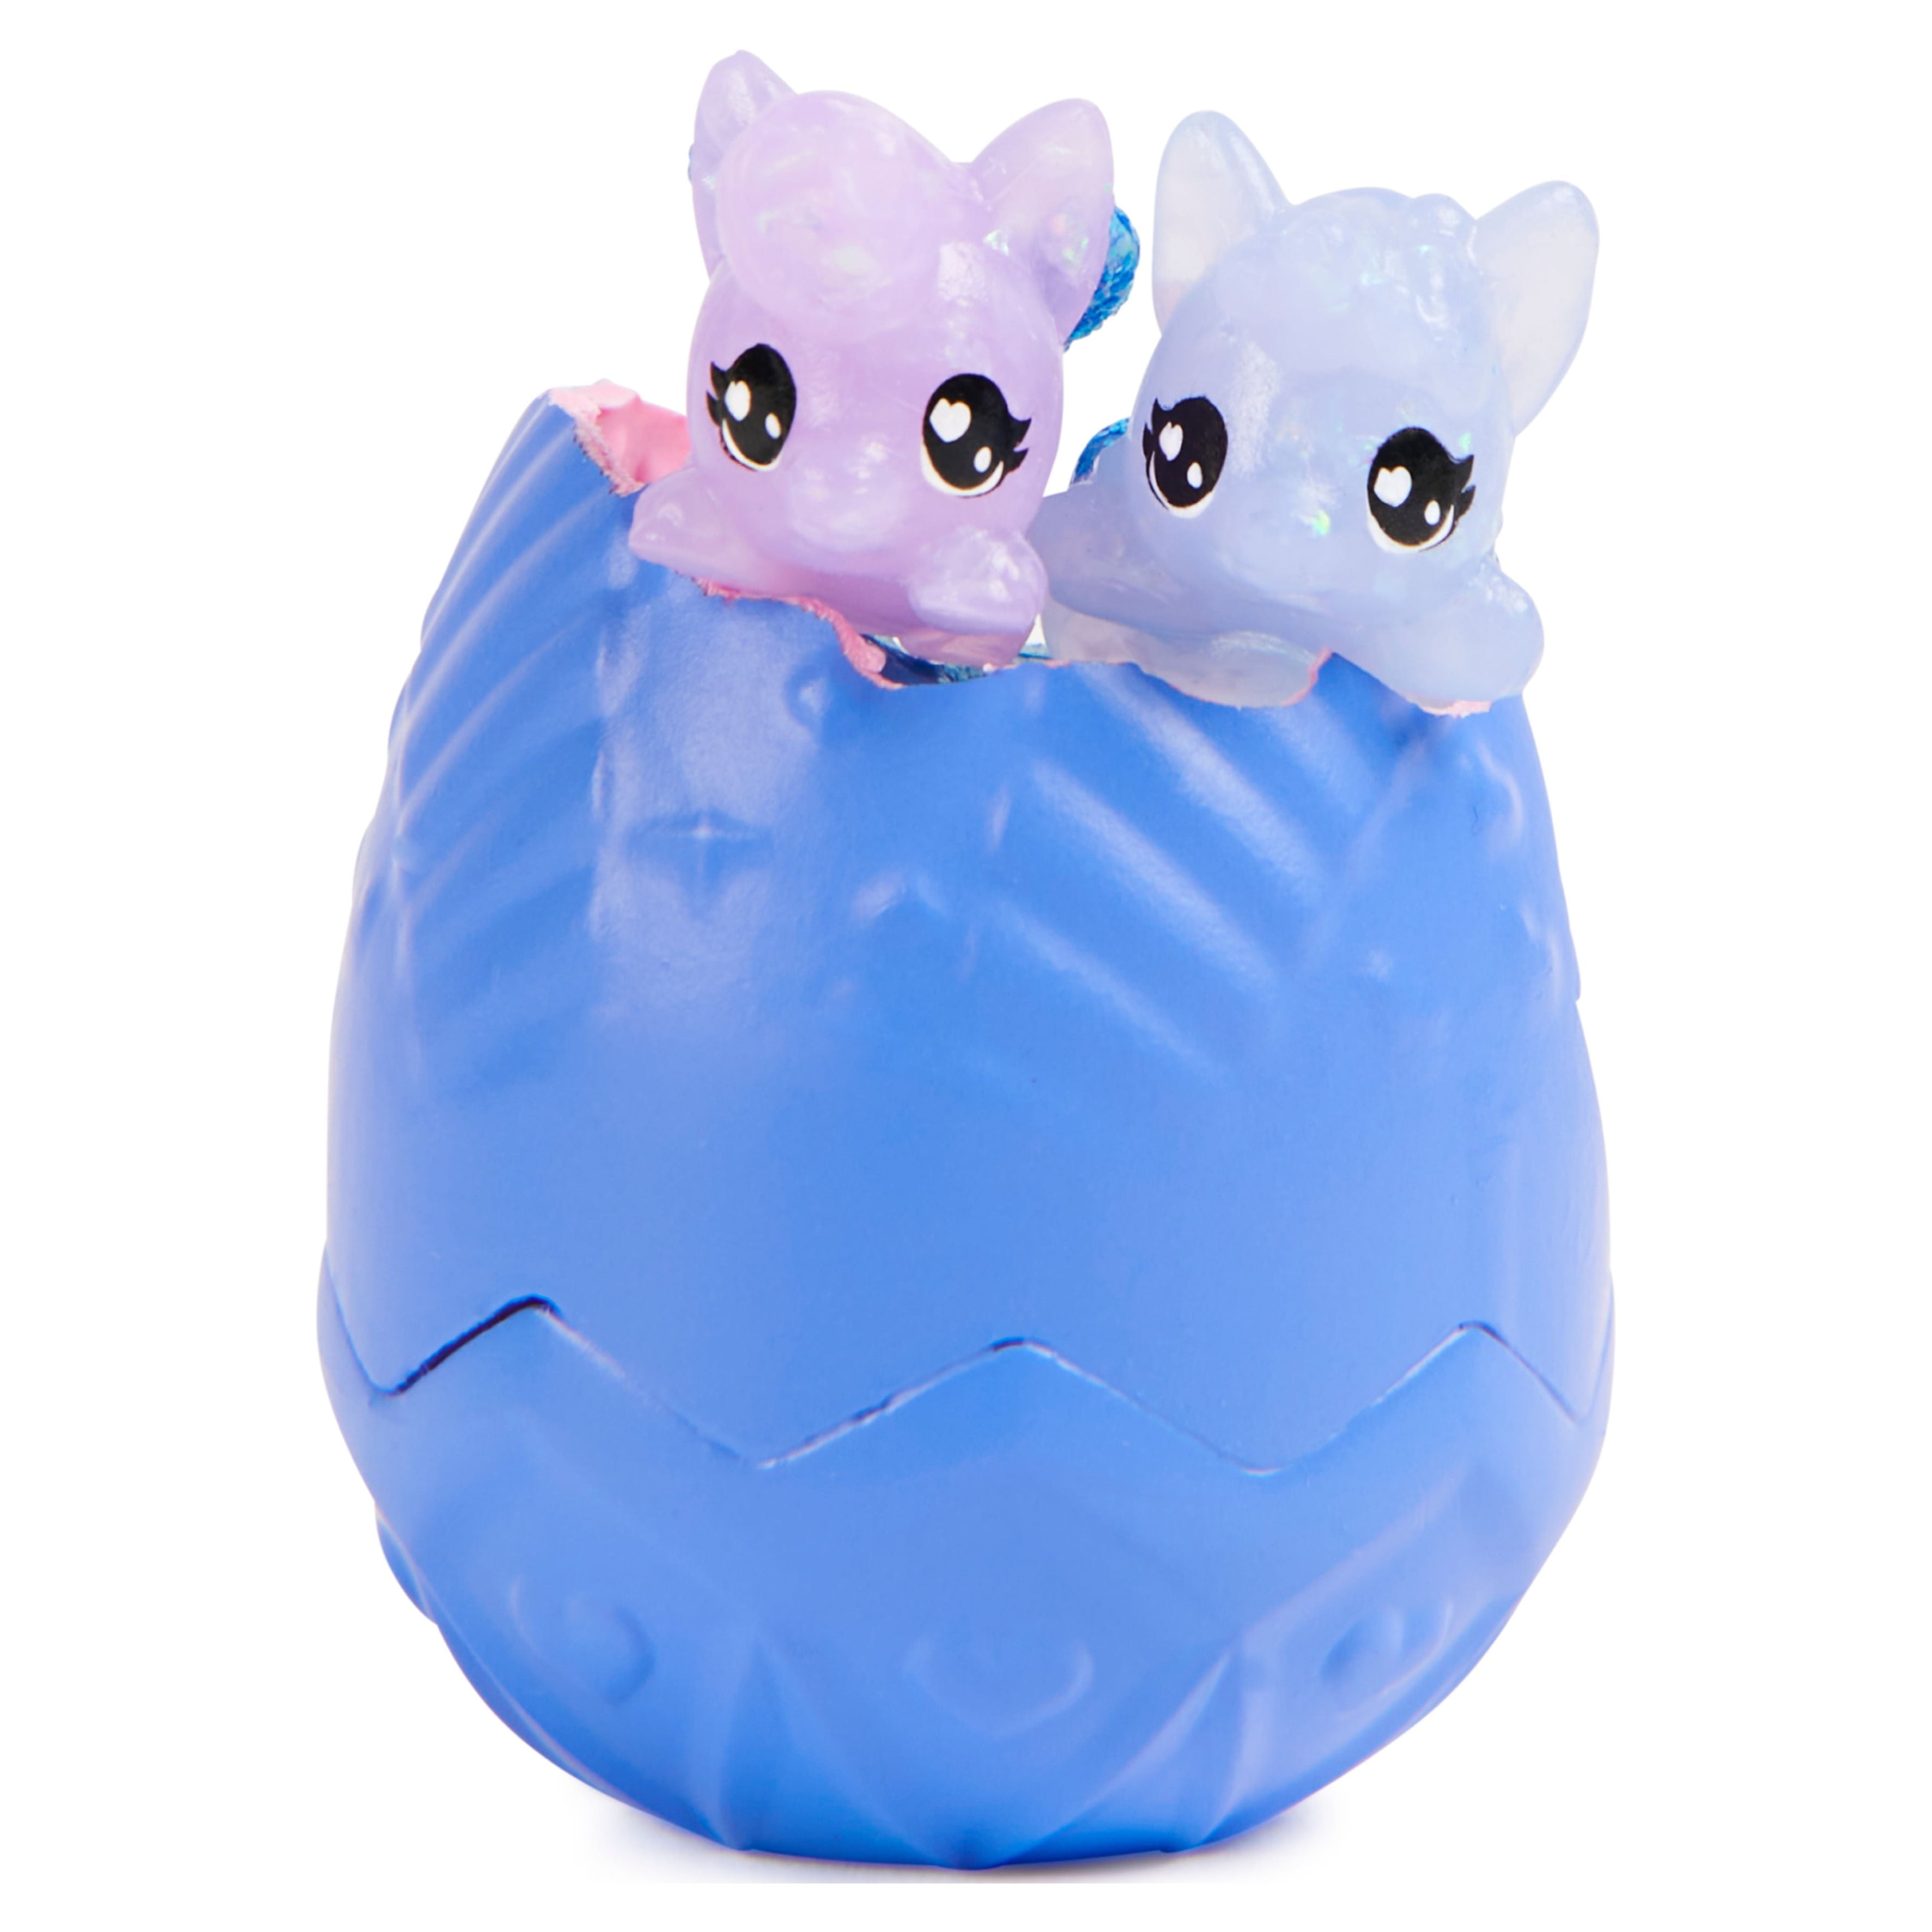 Hatchimals CollEGGtibles, Secret Surprise Playset with 3 Hatchimals (Styles  May Vary), Girl Toys, Girls Gifts for Ages 5 and up - Walmart.com